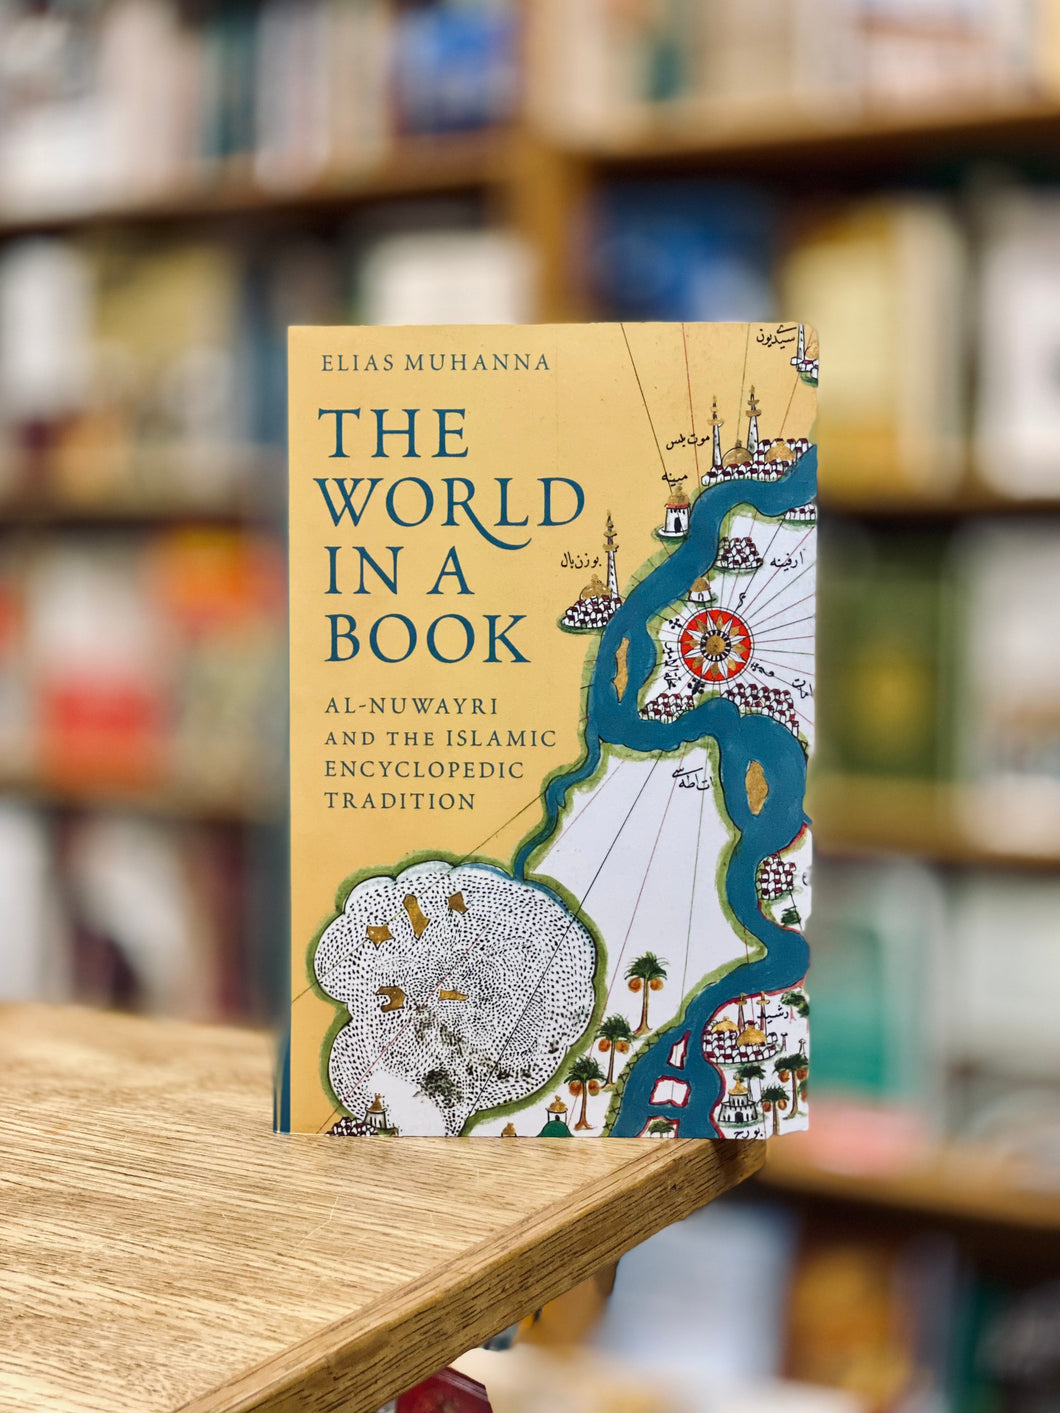 The World in a Book: Al-Nuwayri and the Islamic Encyclopedic Tradition